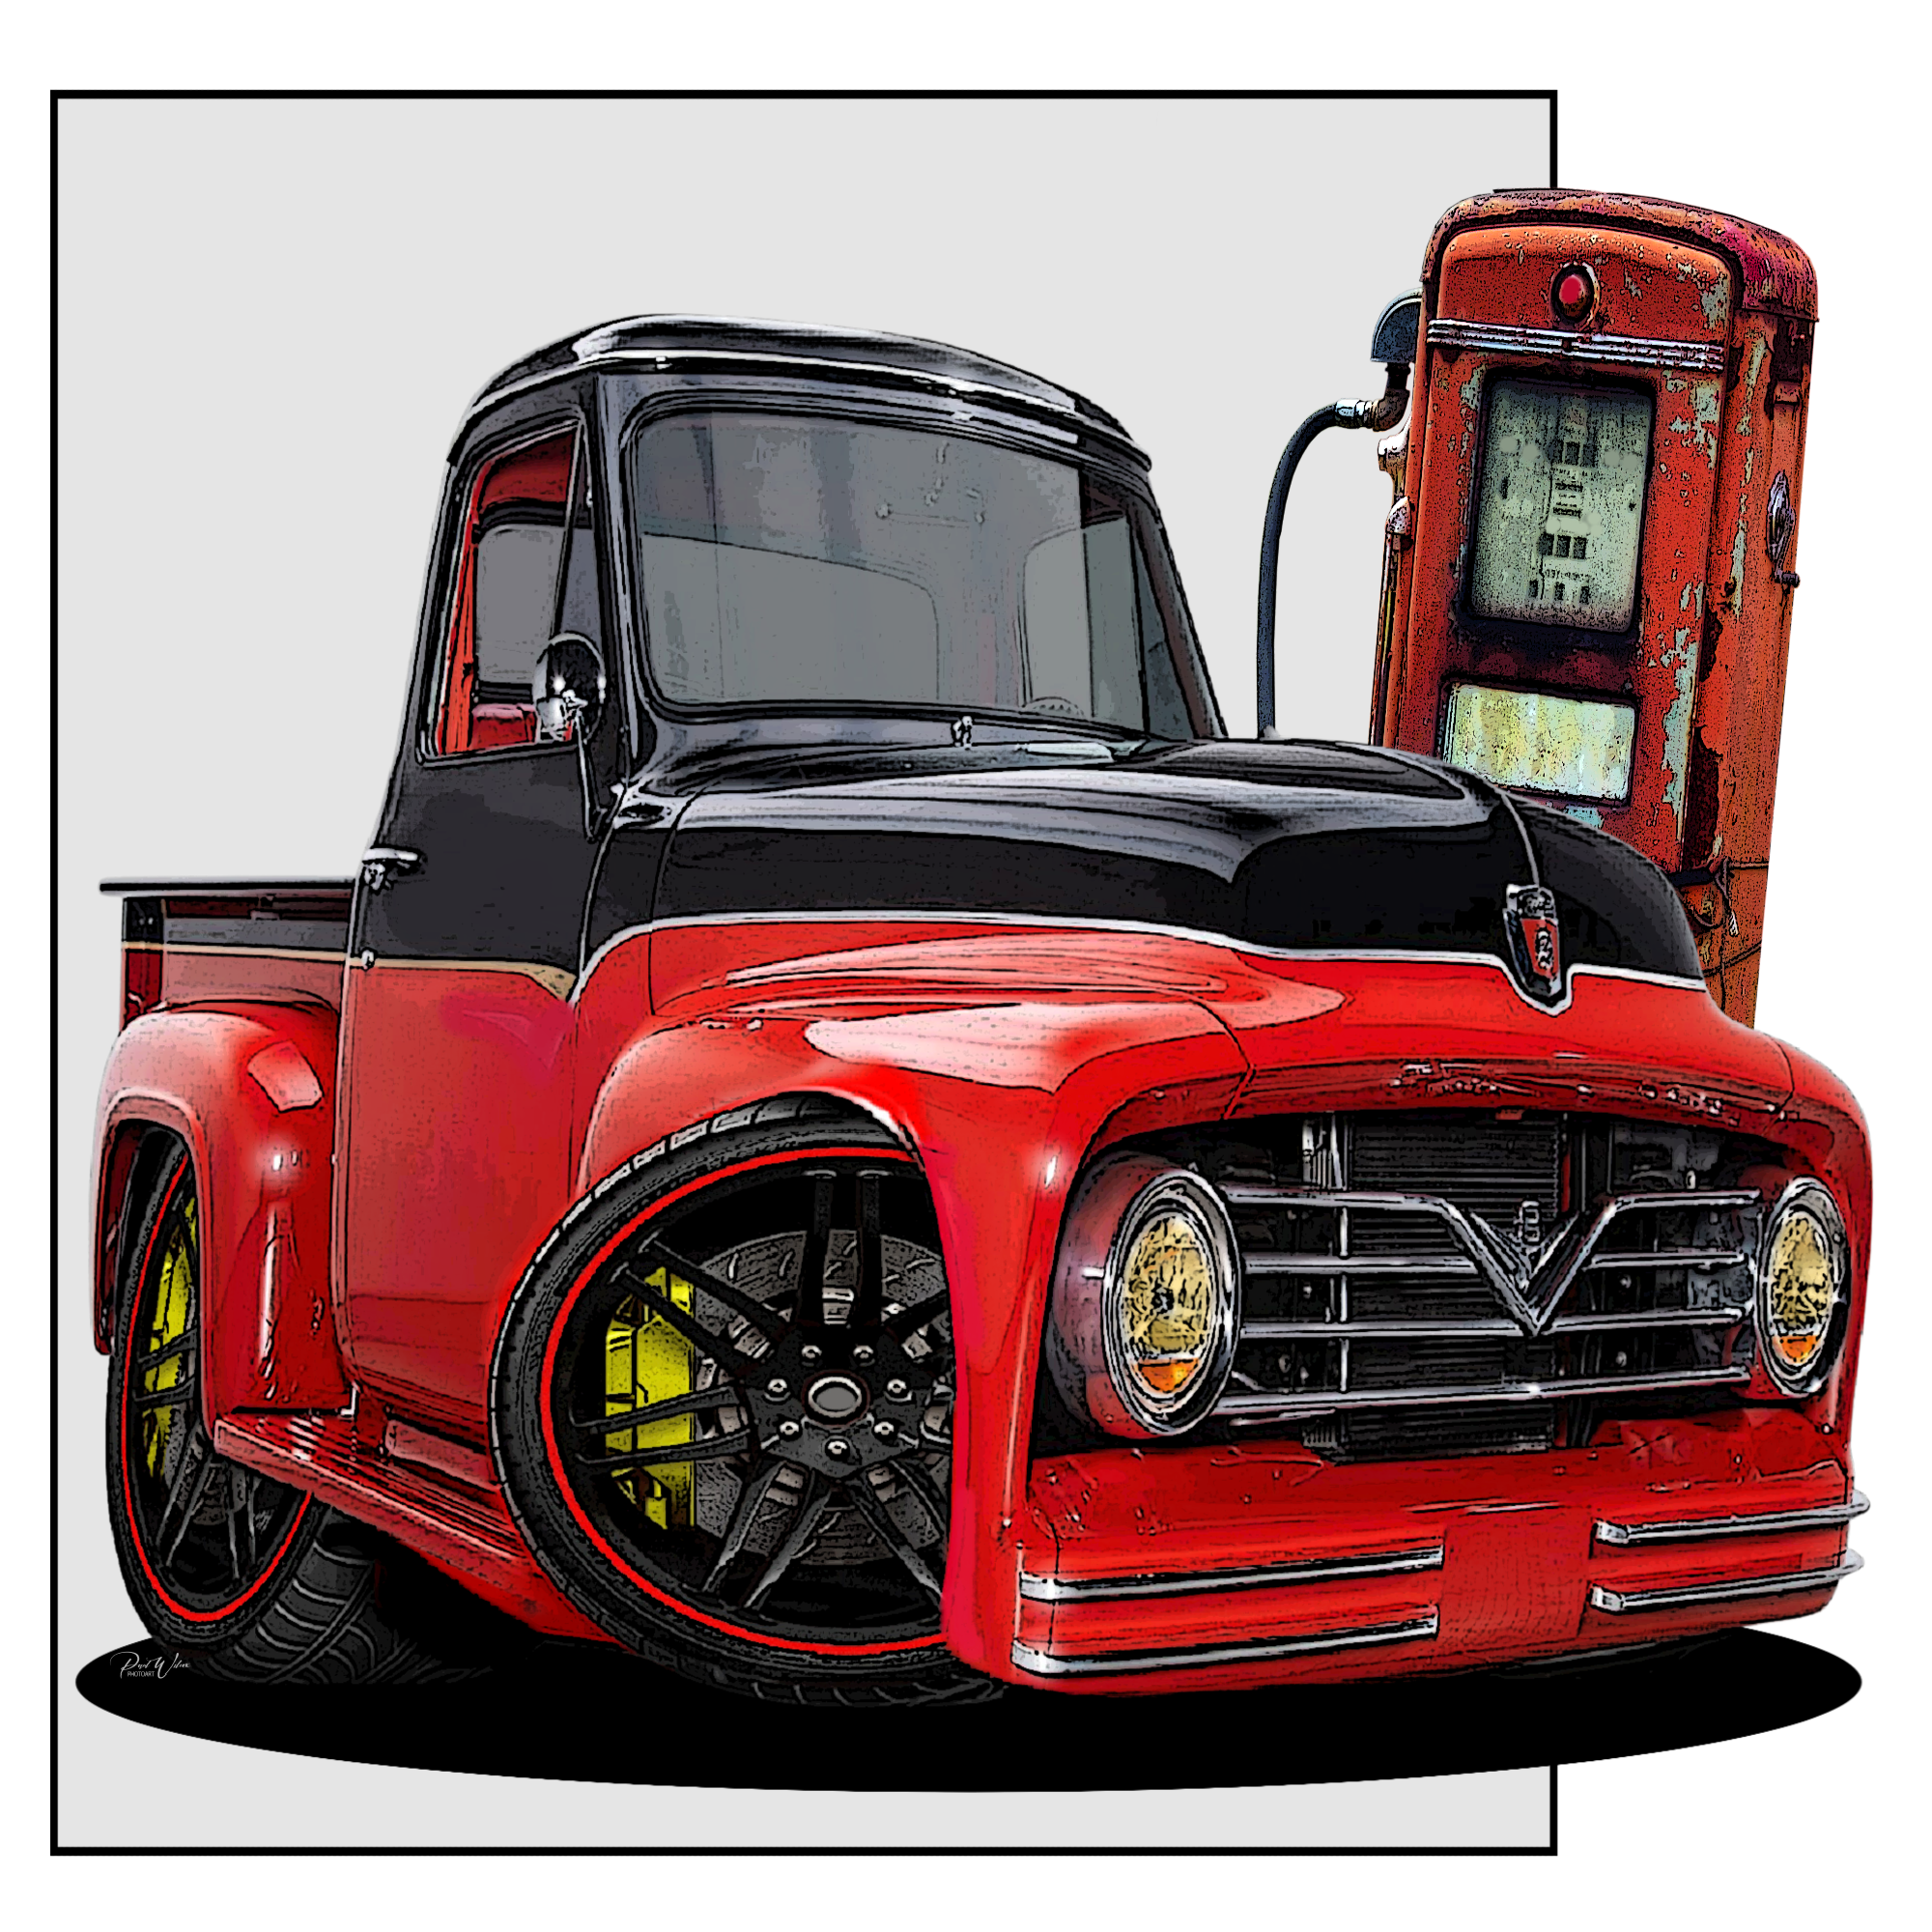 1965 Ford Pickup Truck with Vintage Gas Pump - Image